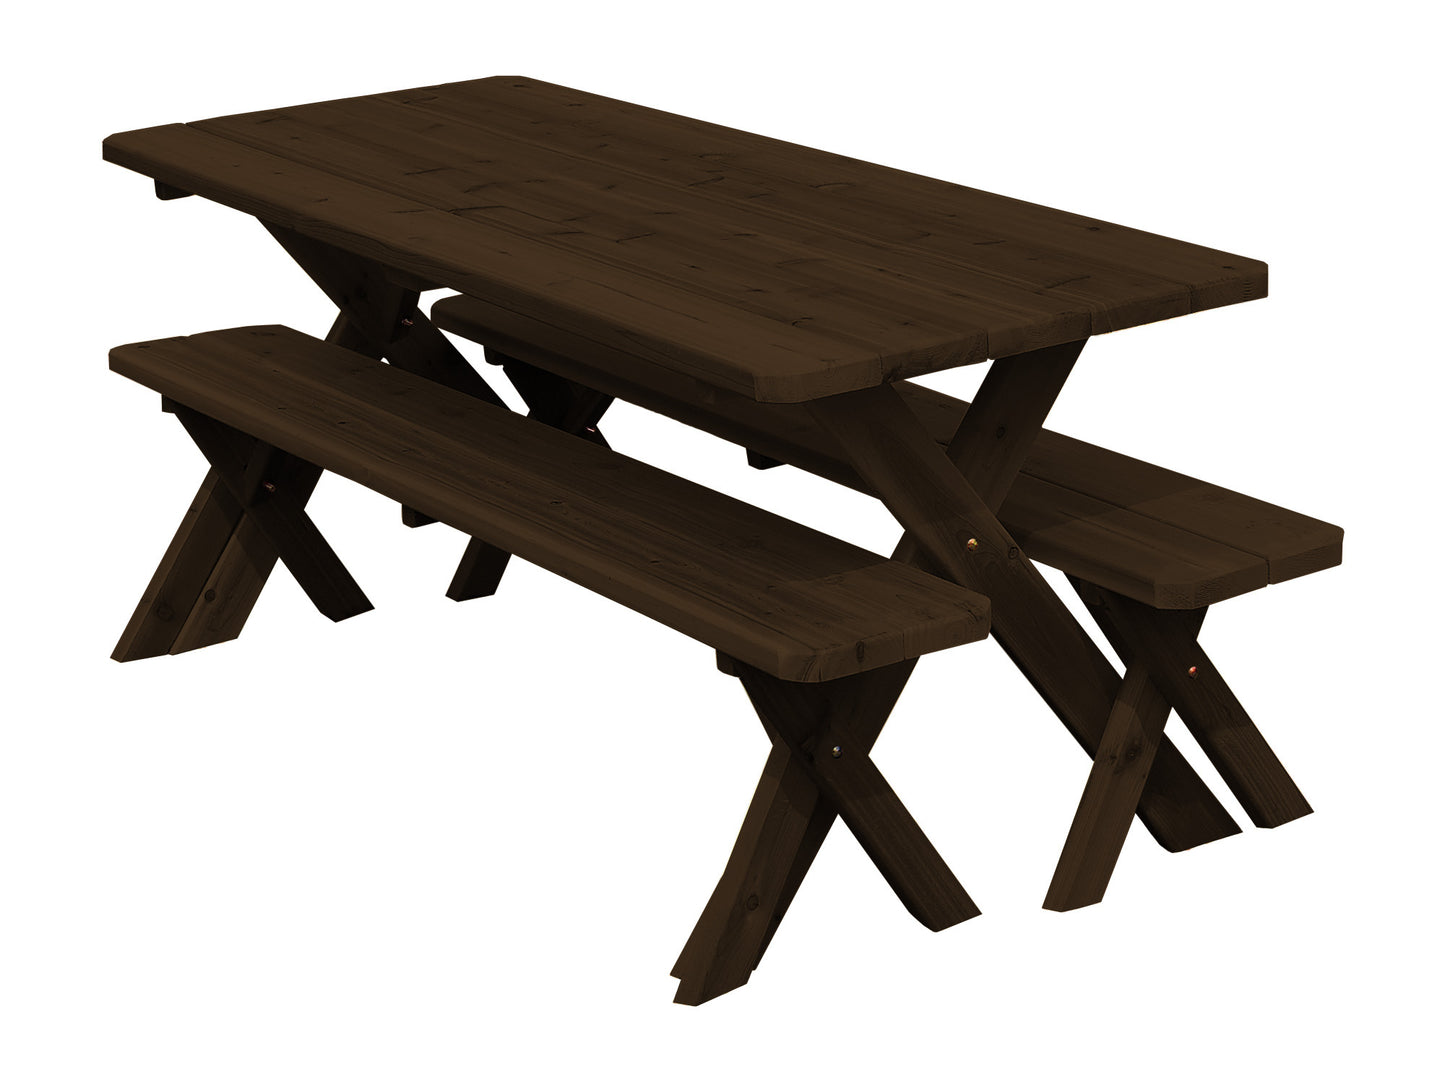 A&L FURNITURE CO. Western Red Cedar 8' Cross-leg Picnic Table w/4  4' Benches - Specify for FREE 2" Umbrella Hole - LEAD TIME TO SHIP 4 WEEKS OR LESS